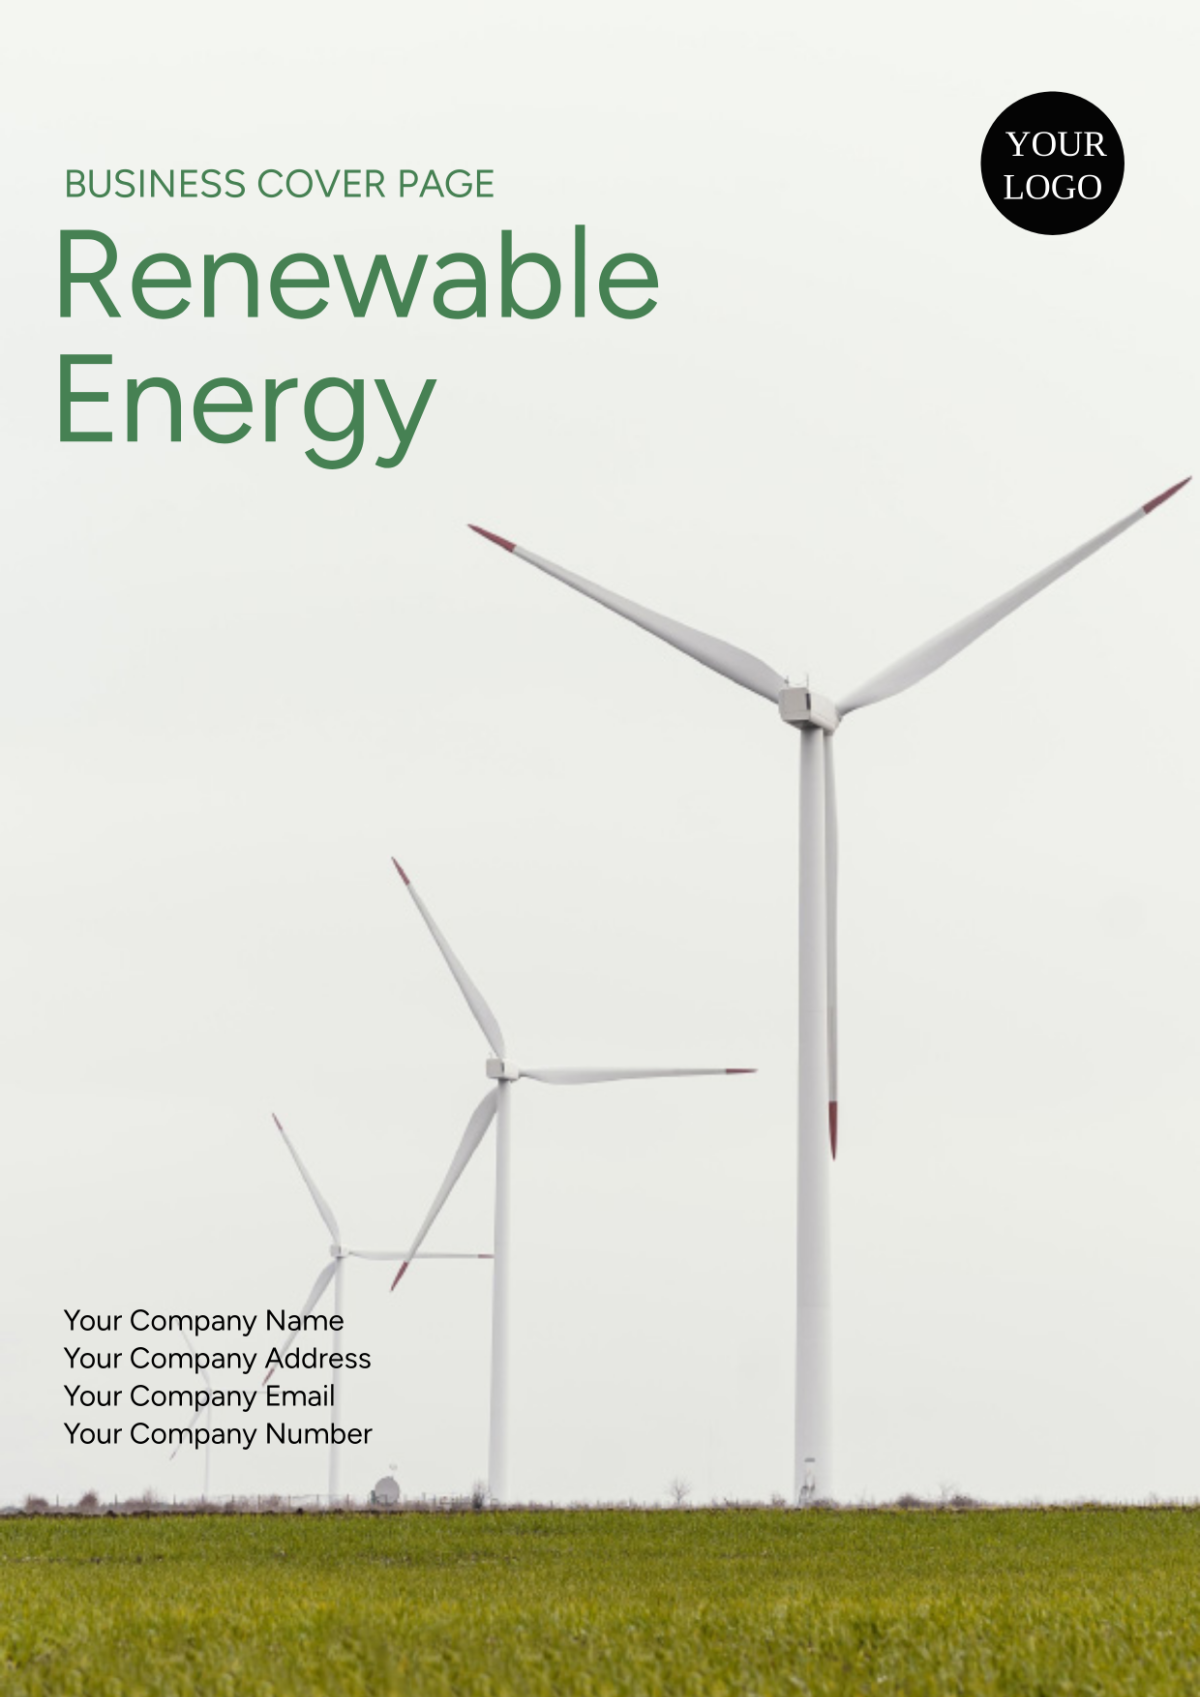 Renewable Energy Business Cover Page